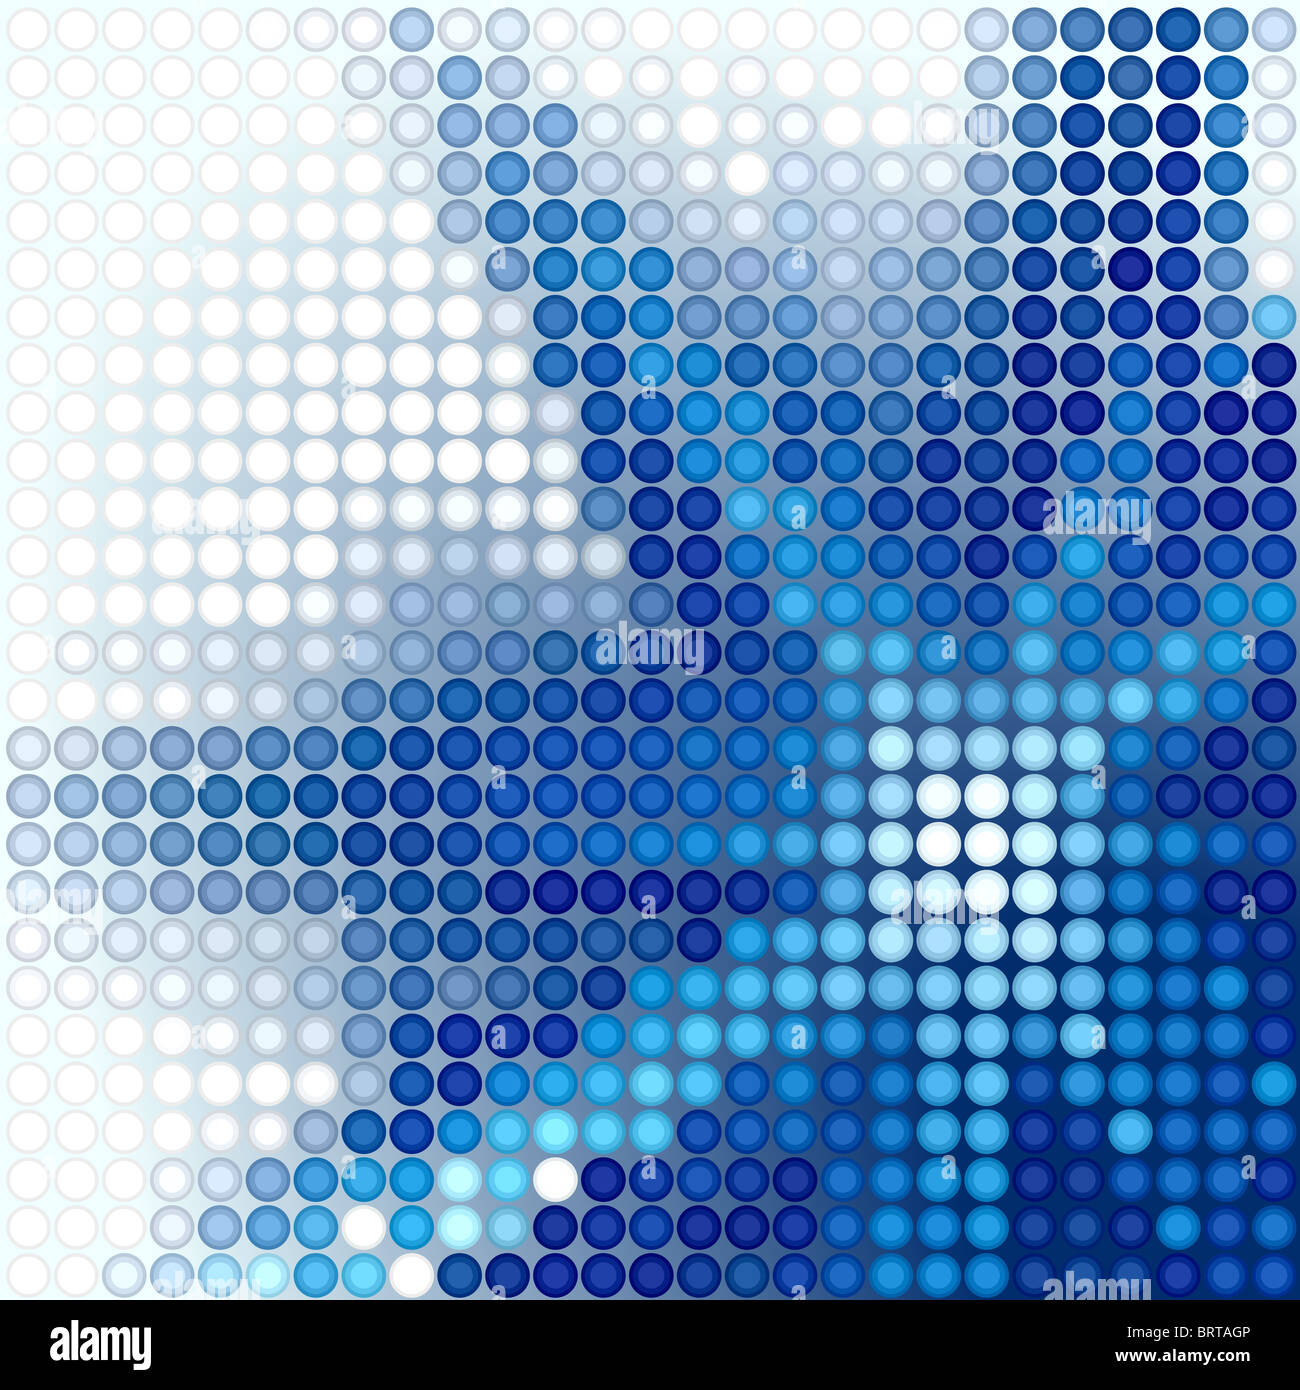 Abstract illustrated background of a blue star shape Stock Photo